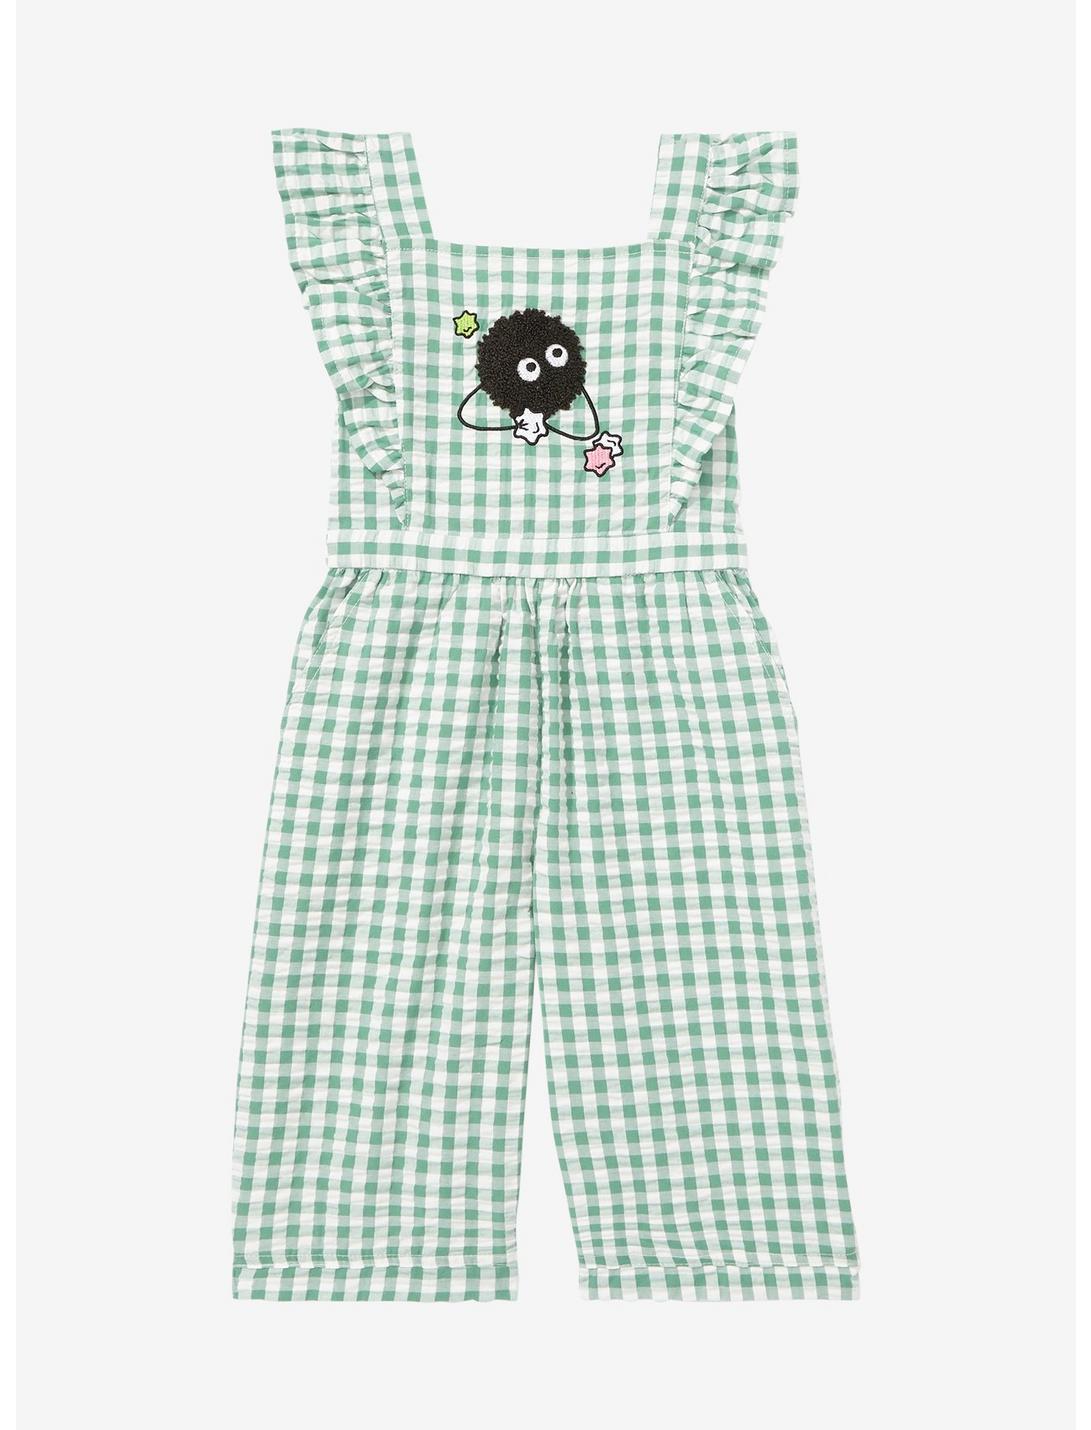 Our Universe Studio Ghibli Spirited Away Soot Sprite Toddler Ruffle Romper - BoxLunch Exclusive, SAGE, hi-res